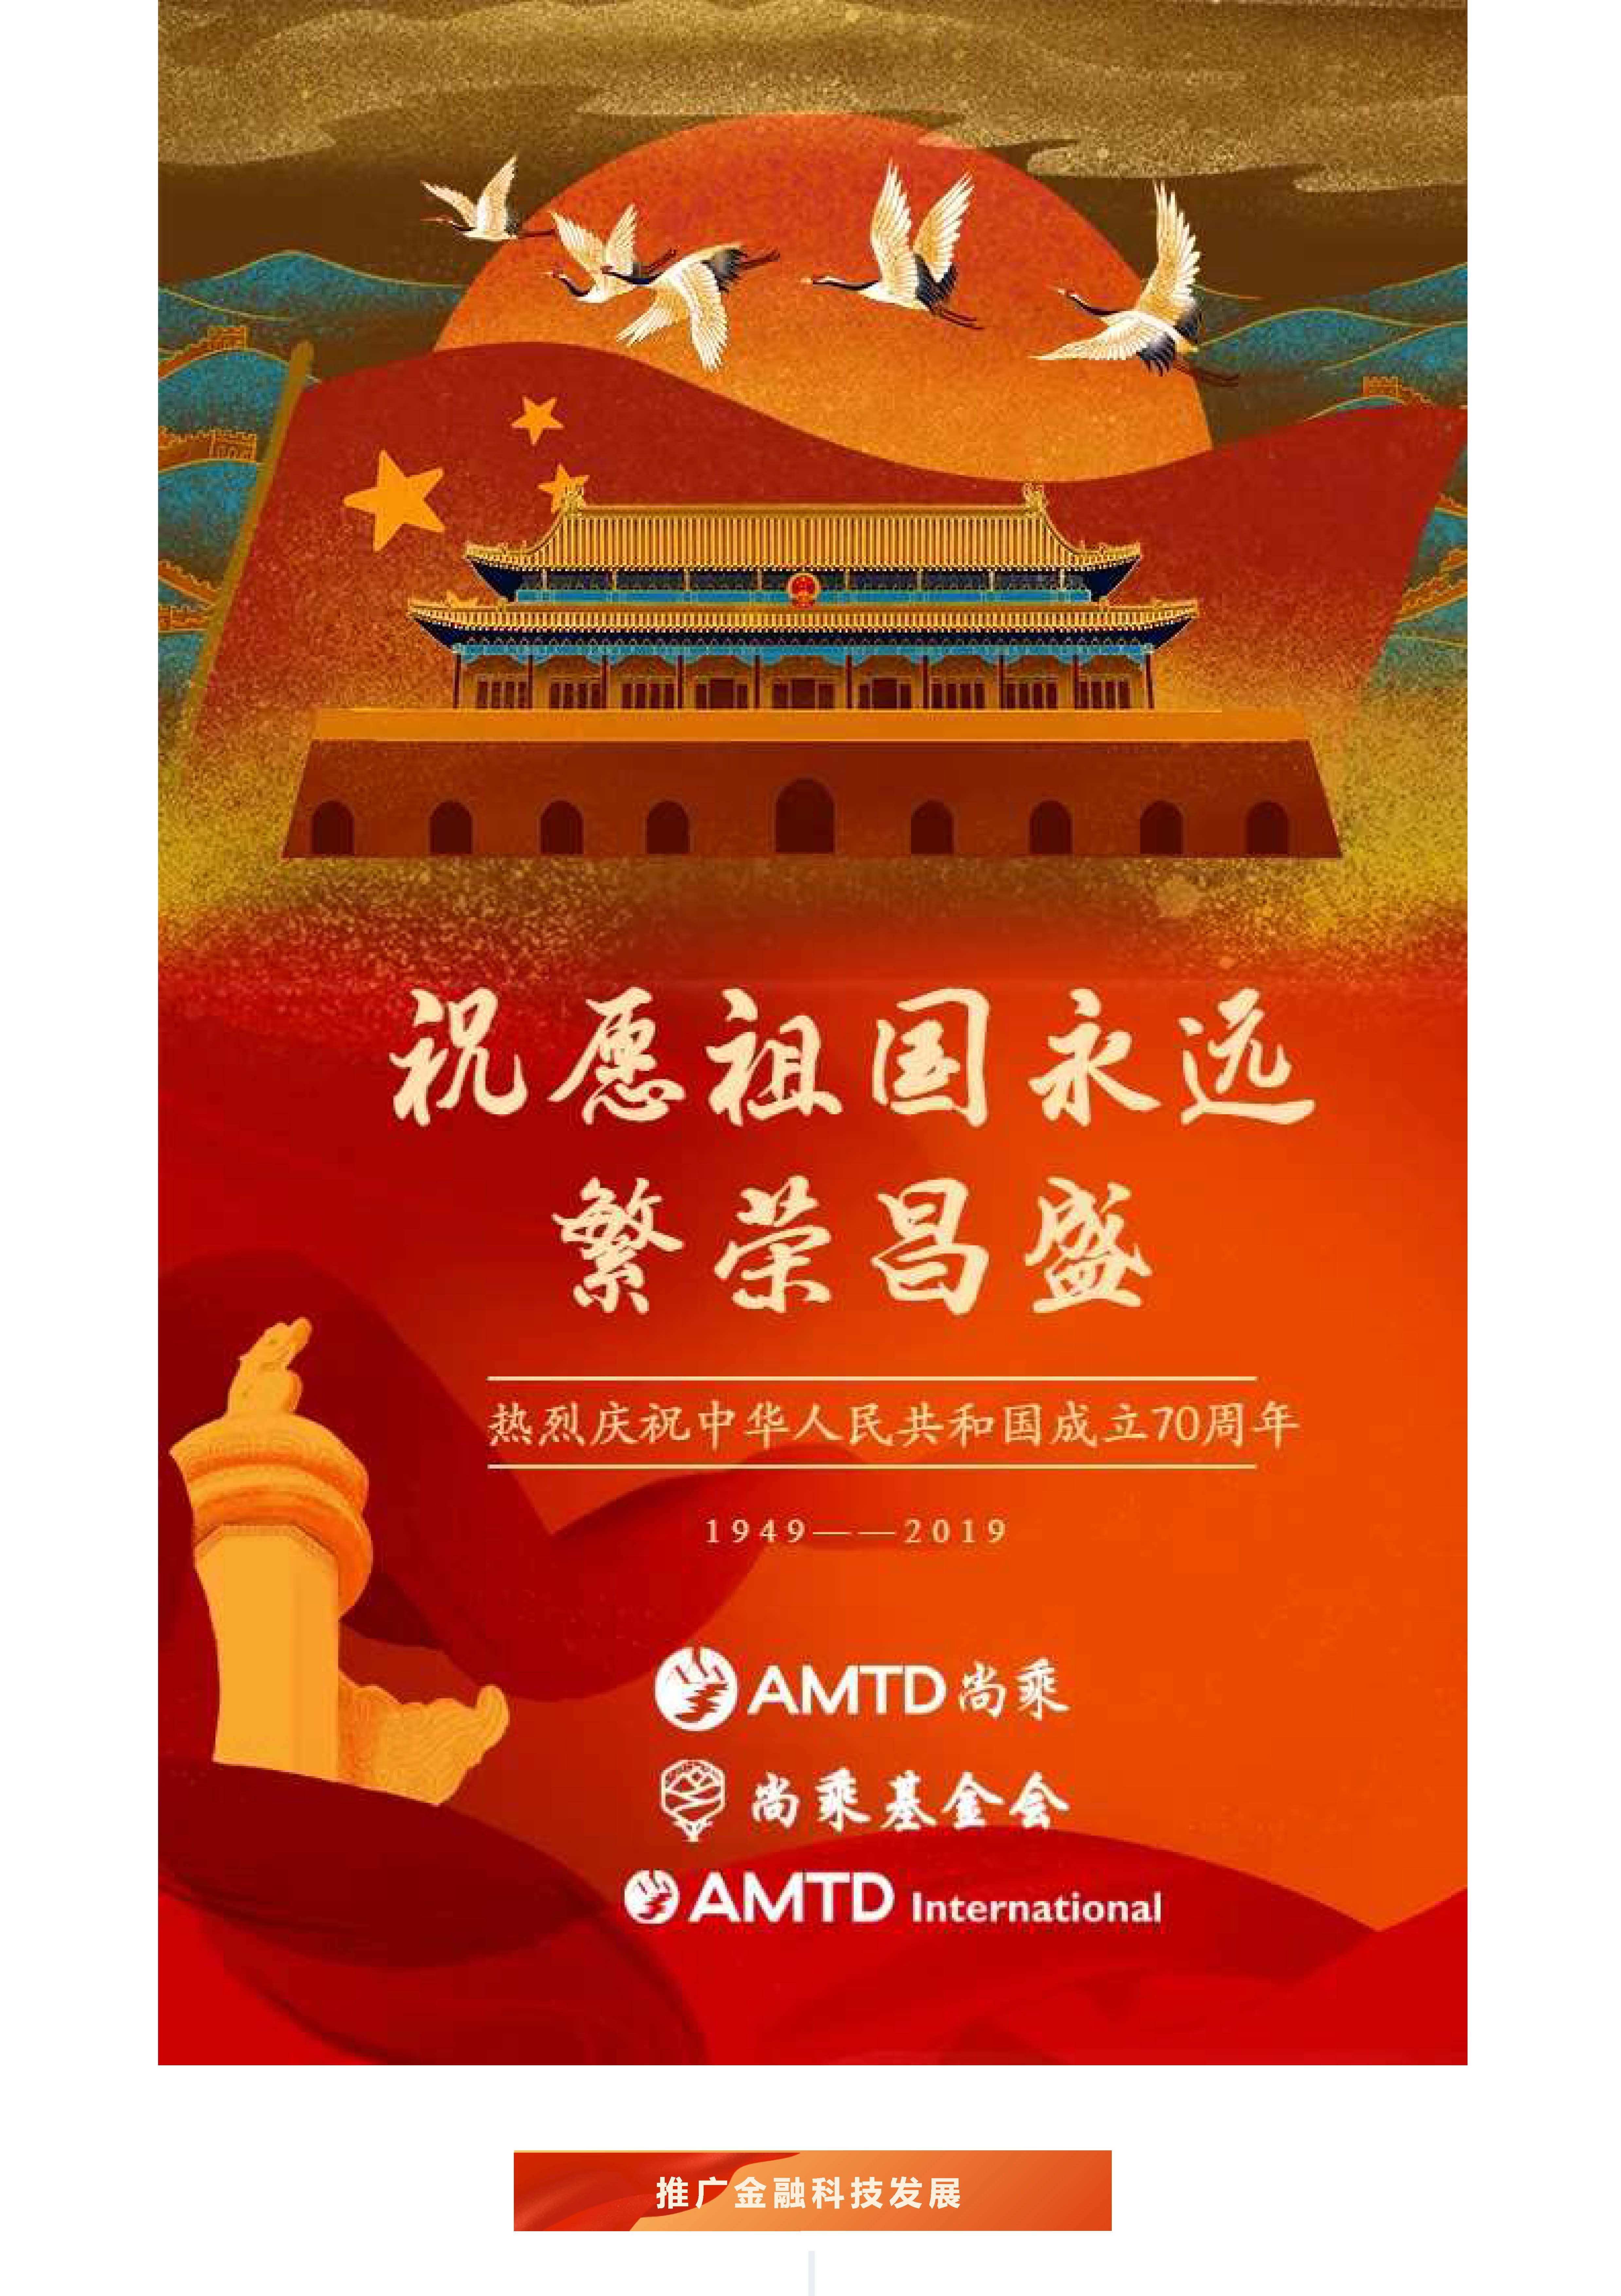 AMTD Cooperate with A Number of Patriotic Hong Kong Associations, Banks, Enterprises and Other Partners to Appeal: To Be Proud of the Great Motherland and Strive for Hong Kong